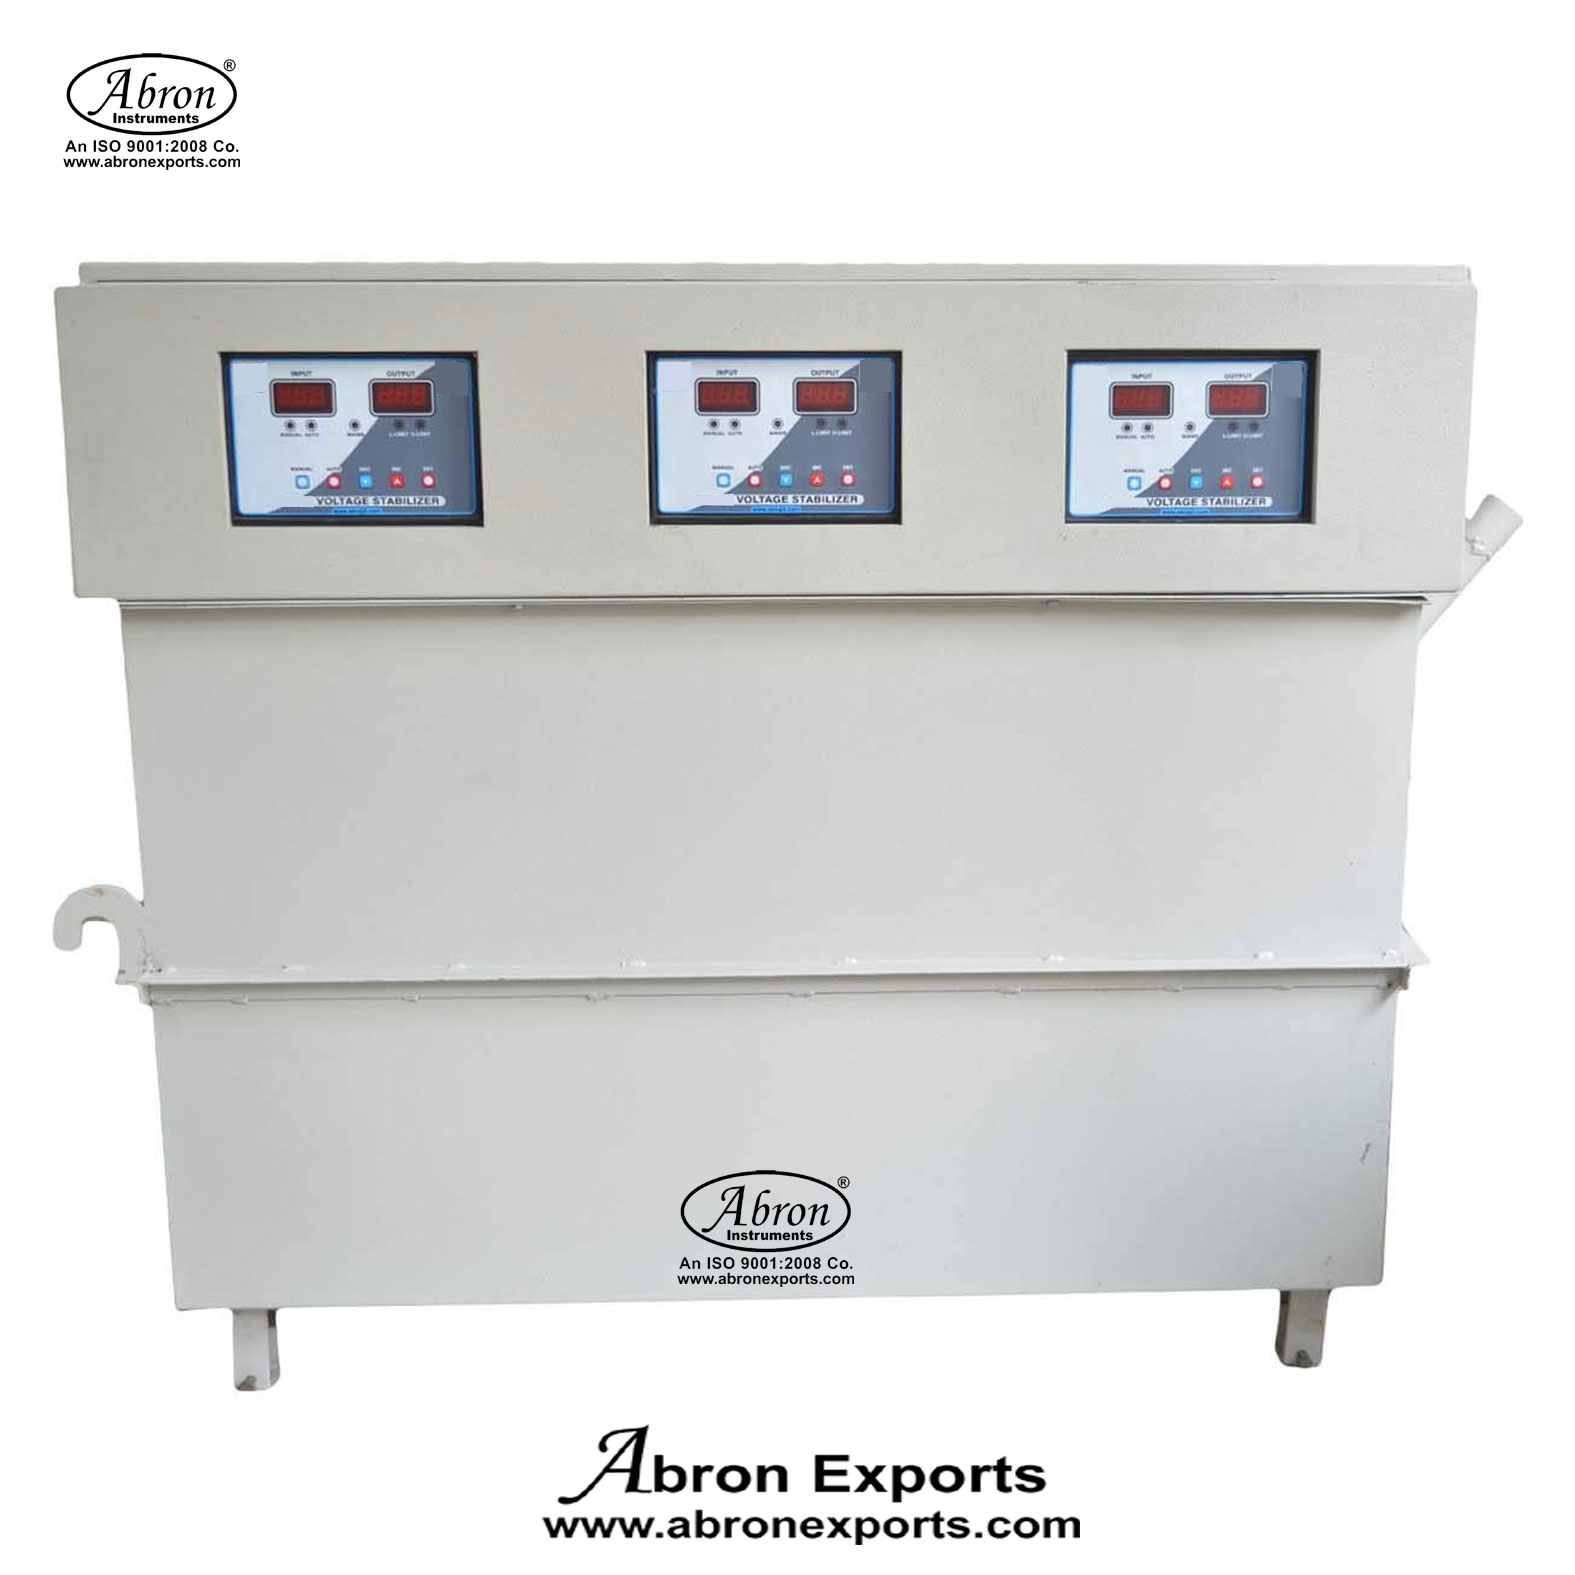 Servo Controlled Voltage Stabilizer 3 Phase Oil Cooled 3 digital meters Abron AE-1387F3